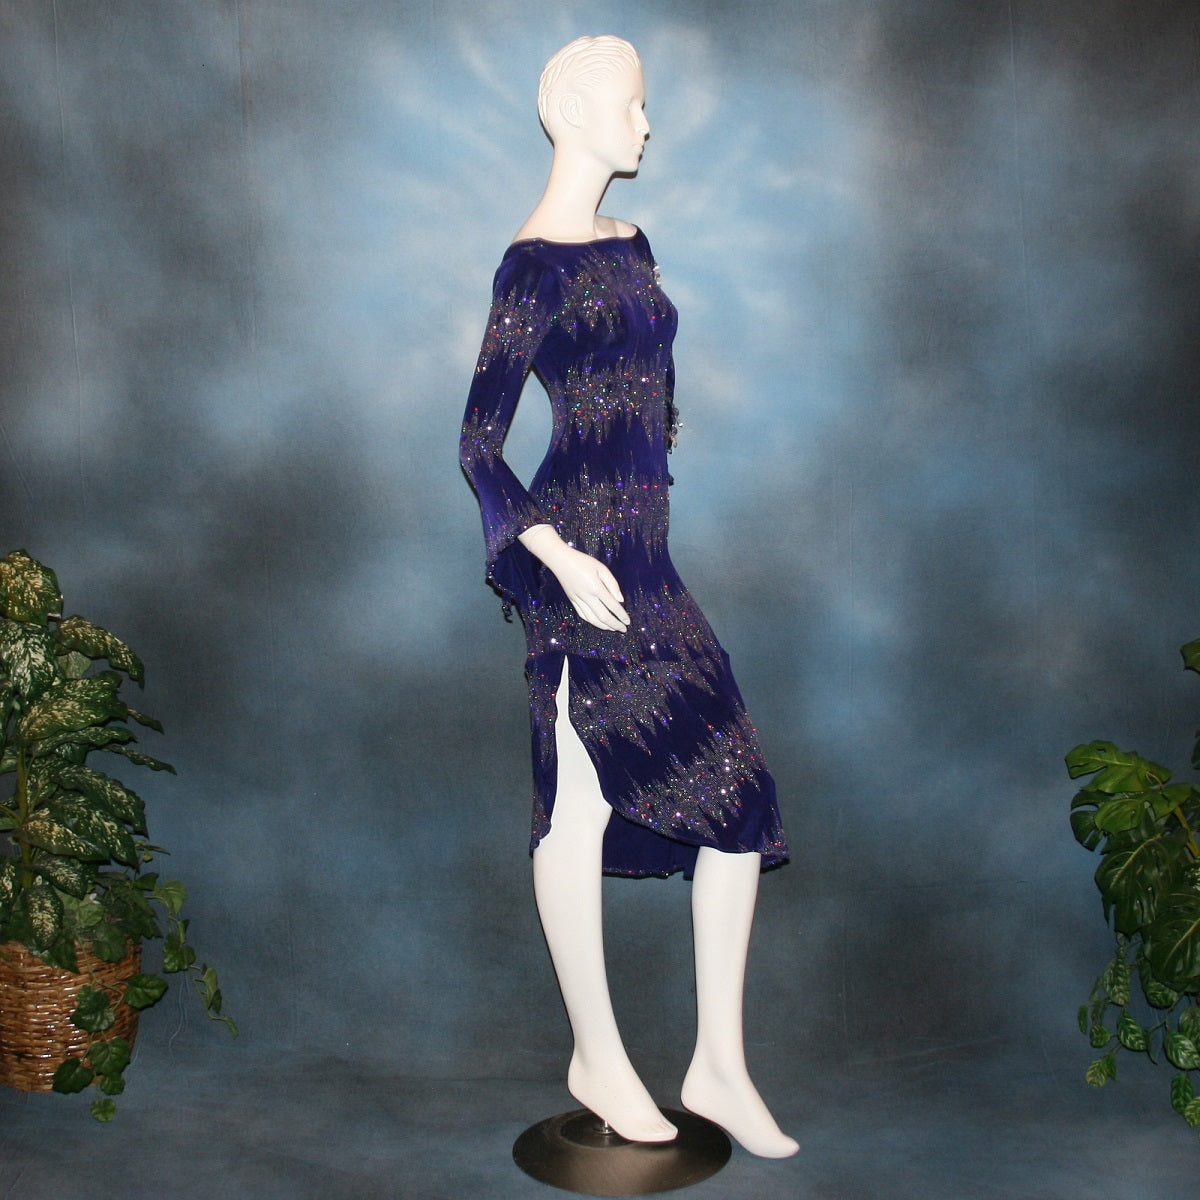 right side view of Deep royal purple Latin/rhythm/tango dress created in deep royal purple glitter slinky with an awesome electrifying glitter pattern features one longe sleeve, with flair at the bottom, & another very interesting cold shoulder detailed one with hand beading & a flaired flounce.